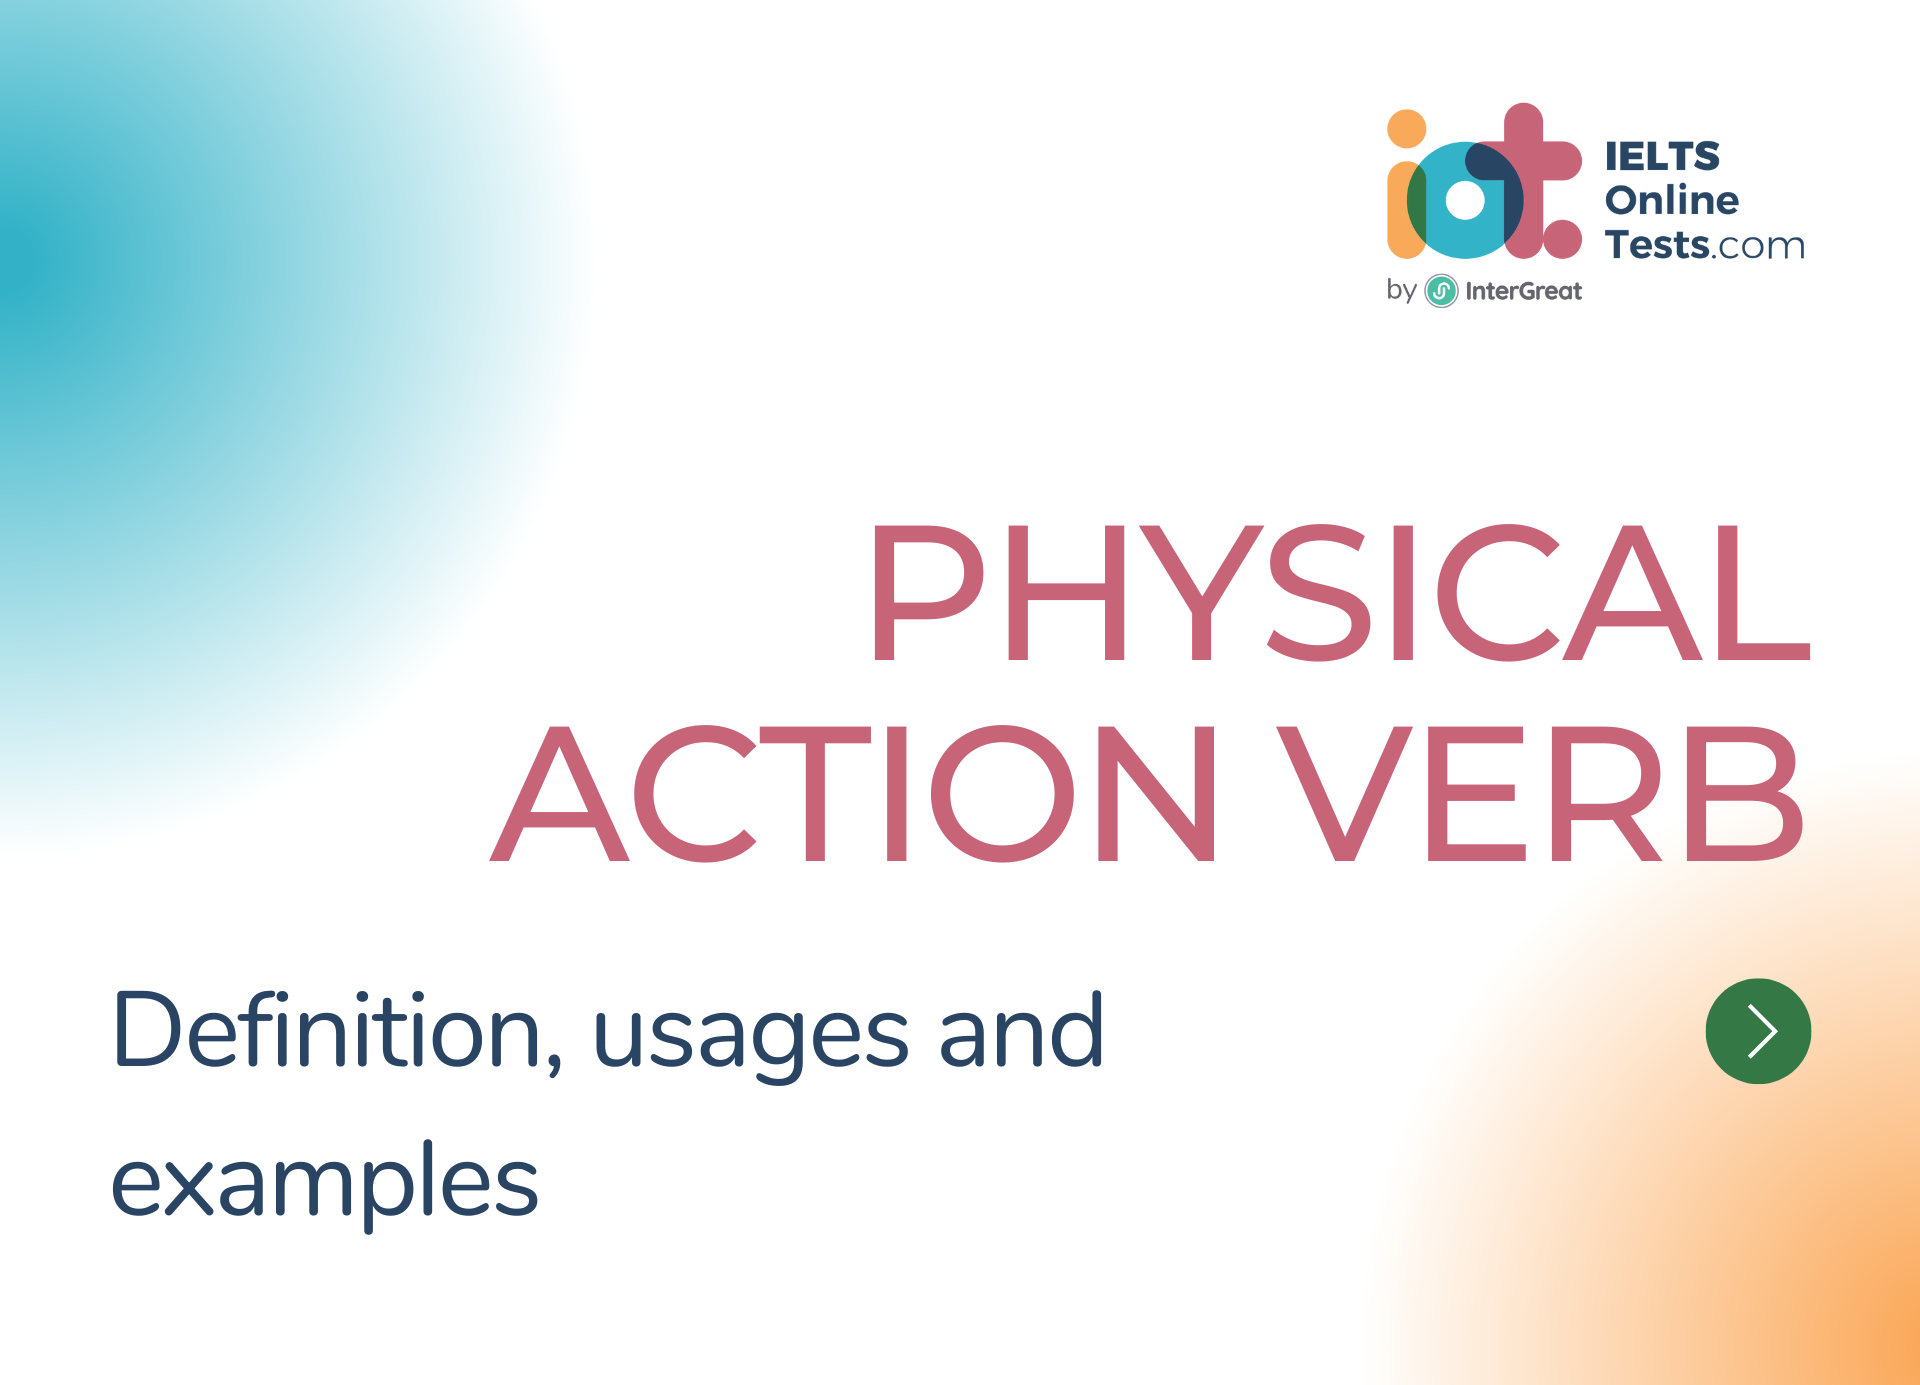 Physical action verb definition and examples